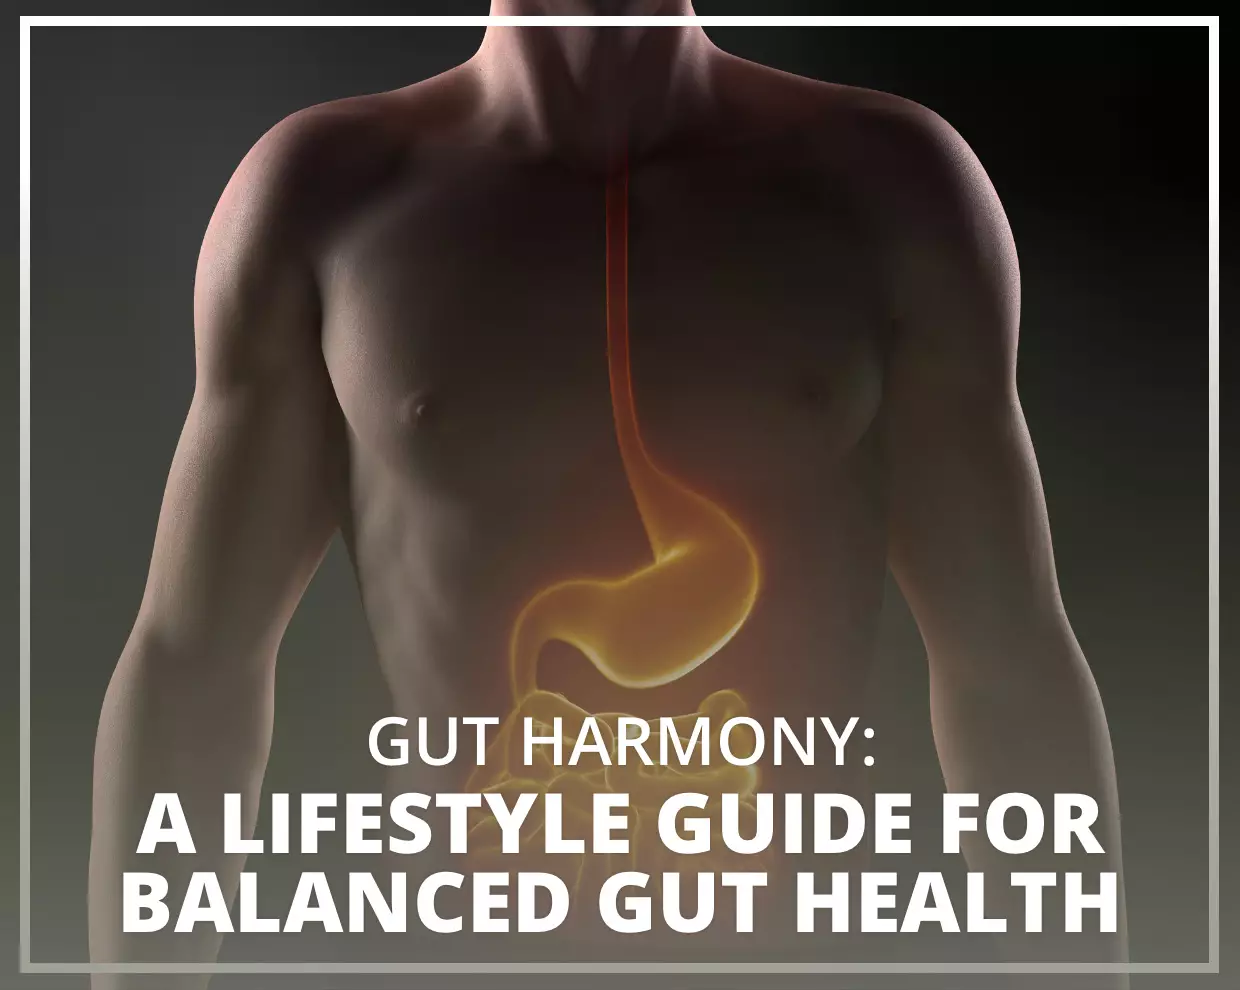 A Lifestyle Guide for Balanced Gut Health